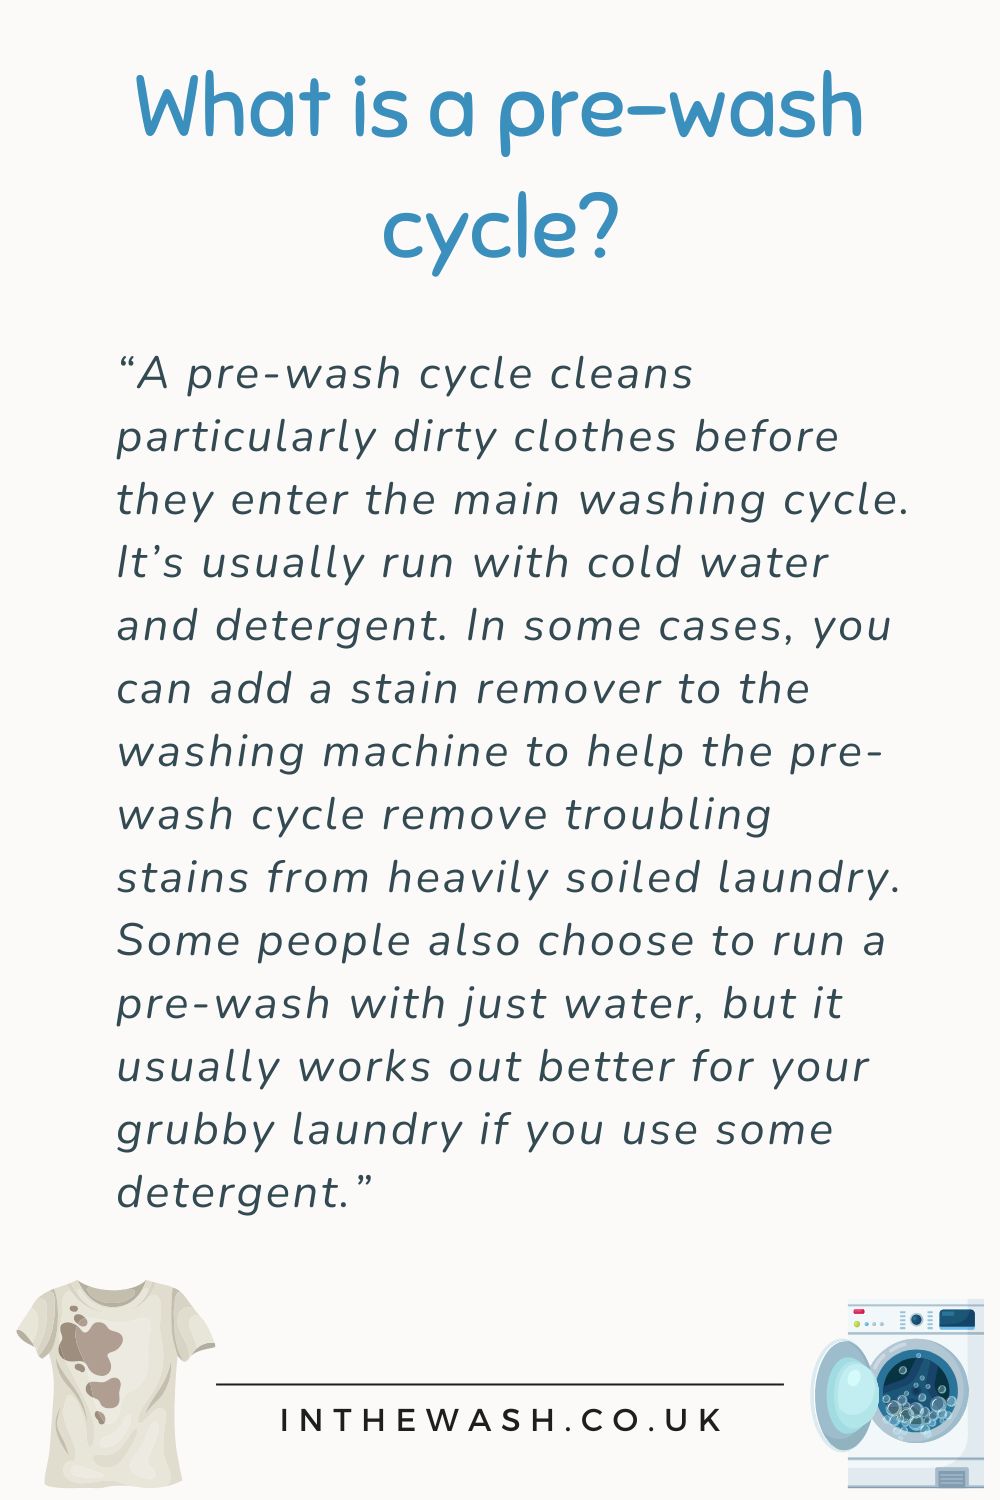 What Is Pre-Wash in a Washing Machine